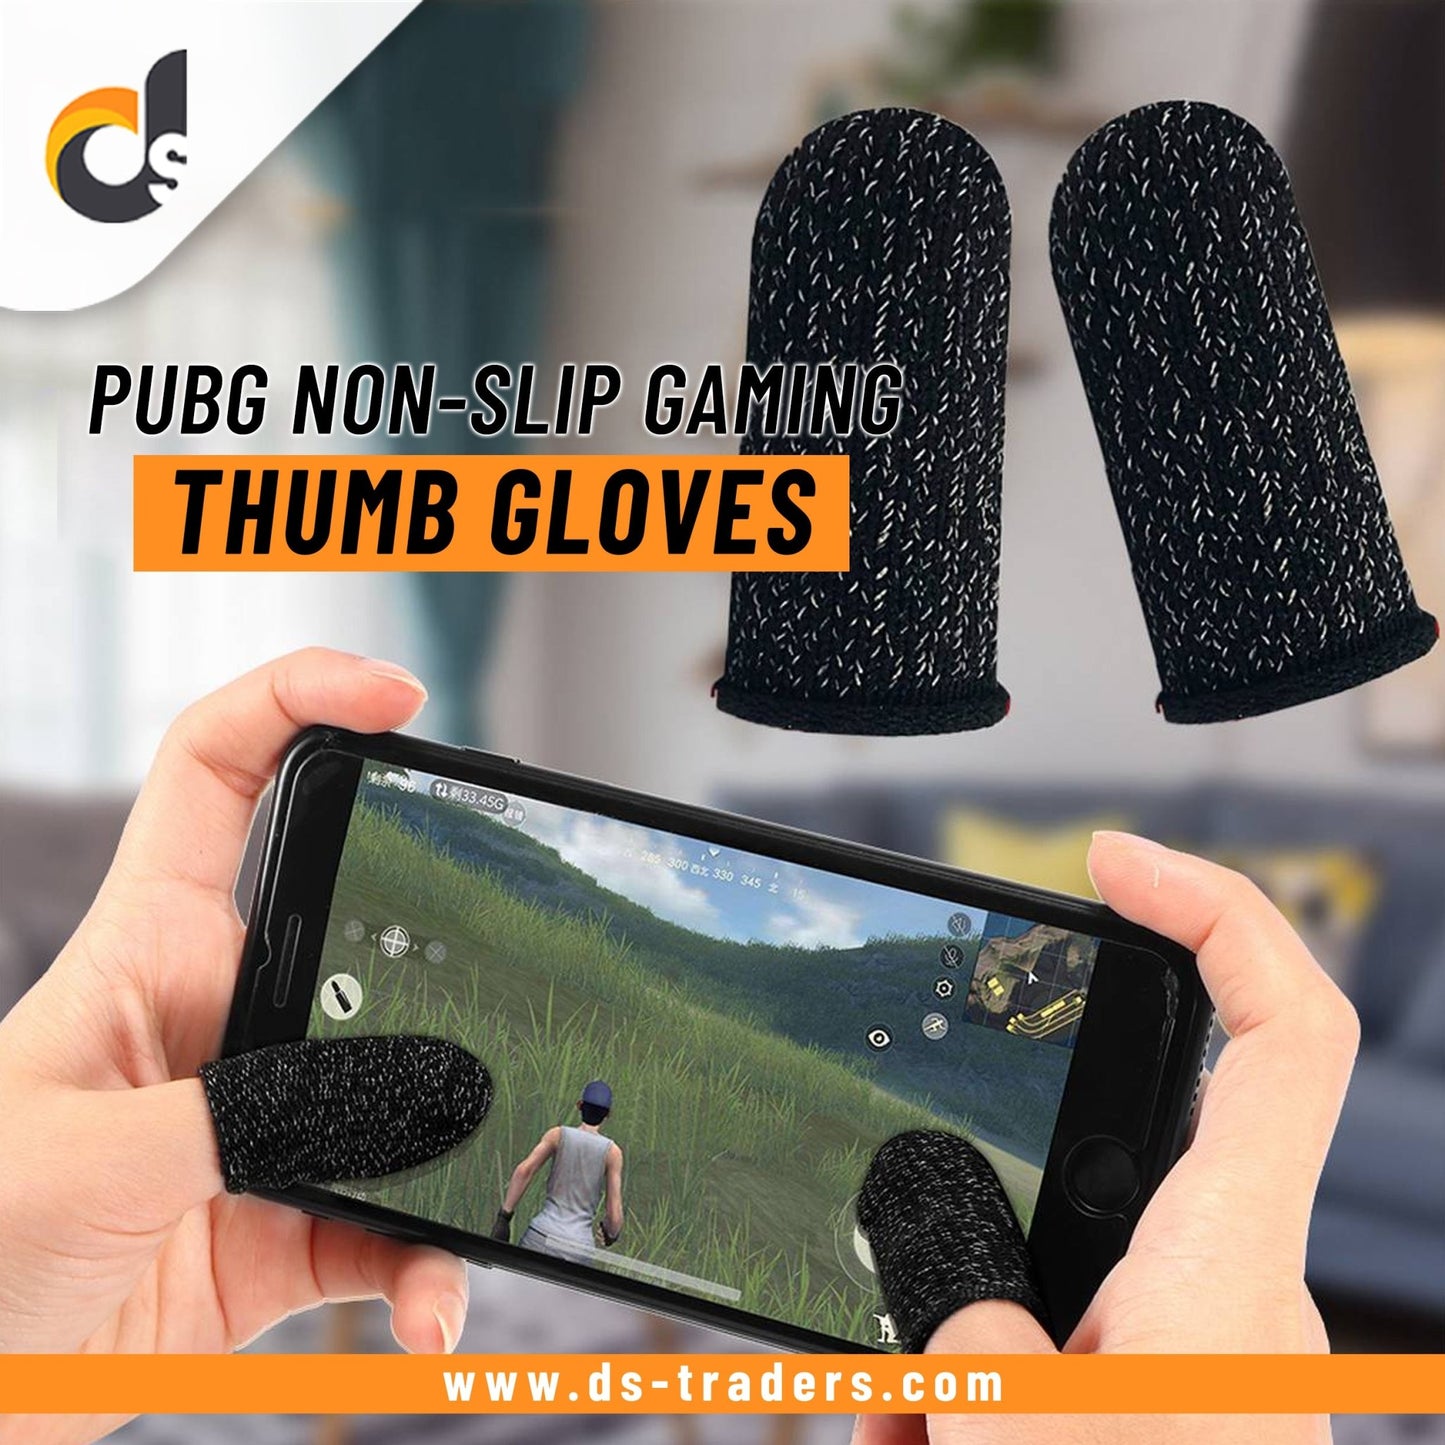 PUBG Non-Slip Thumbs Gloves for Gaming - DS Traders